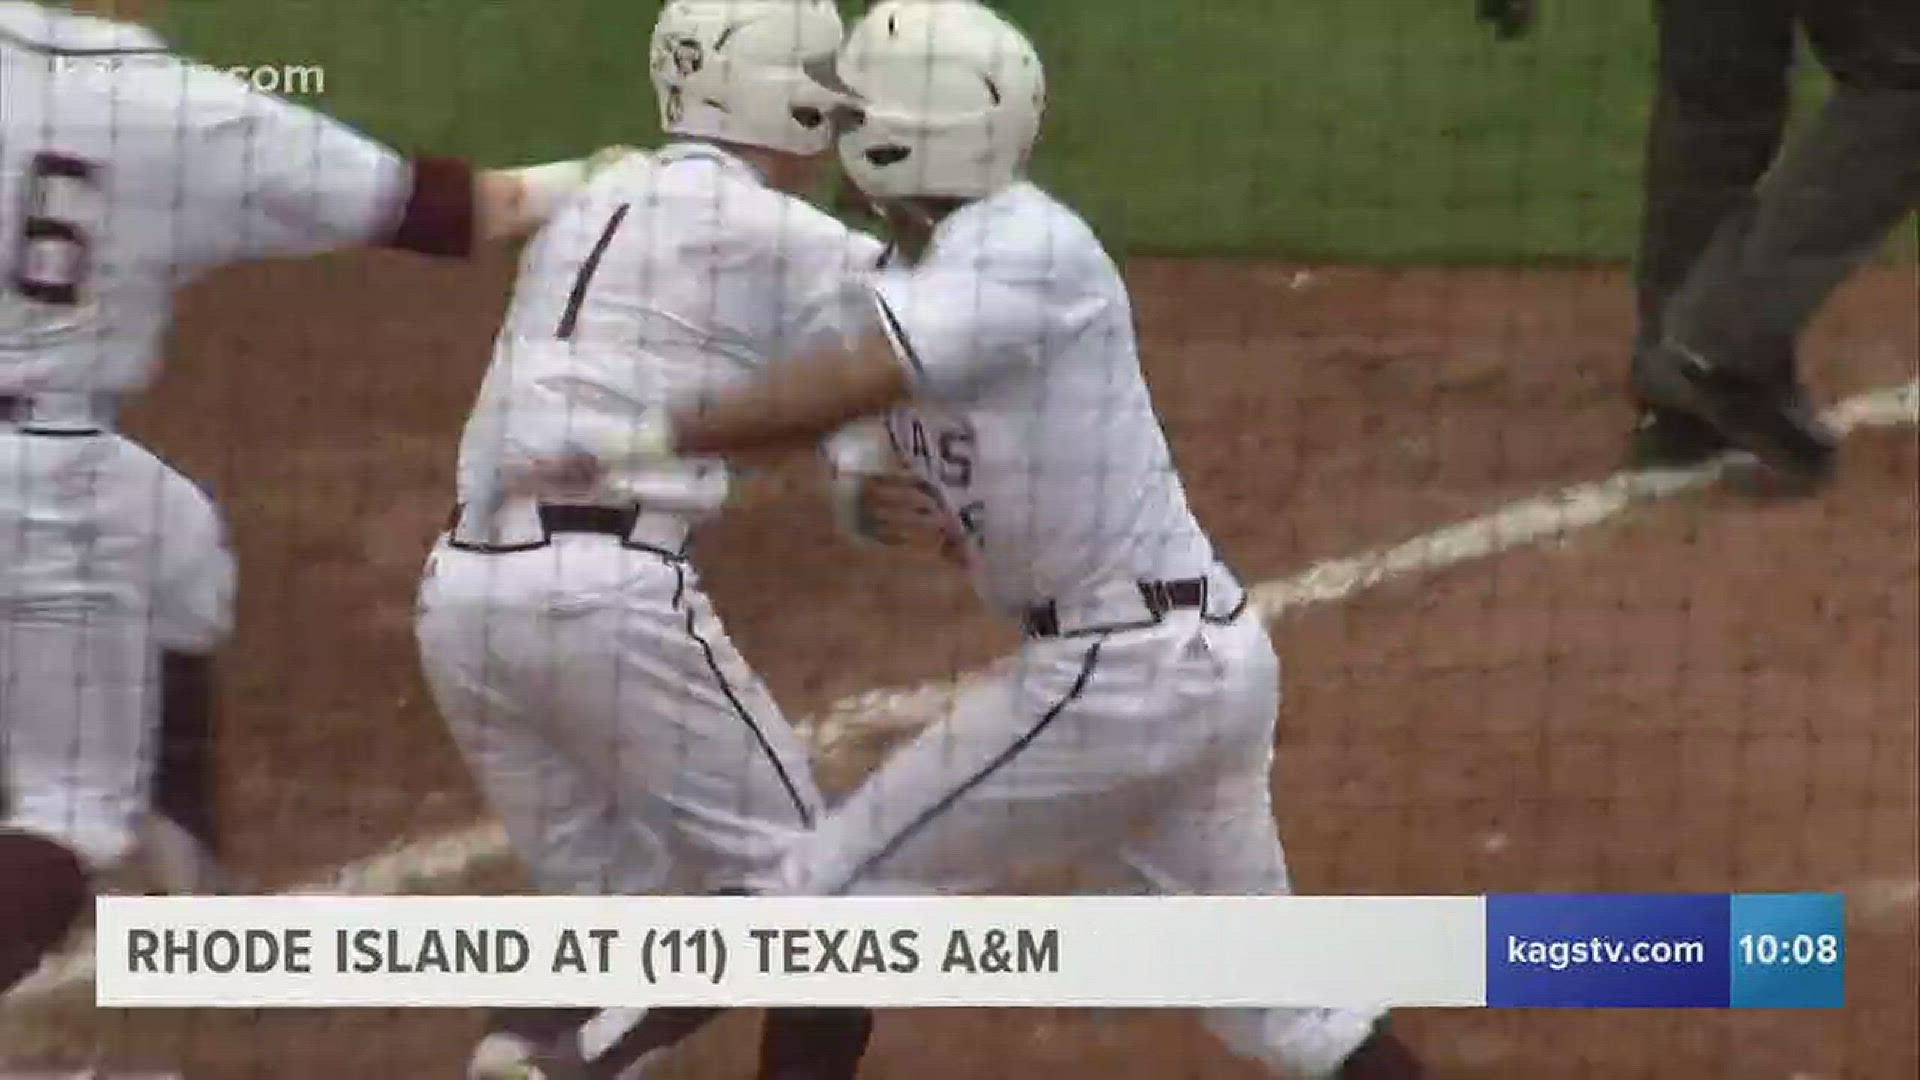 DeLoach, with the infield drawn in, had the game winning single in the 9th inning to give A&M a 4-3 win over Rhode Island.